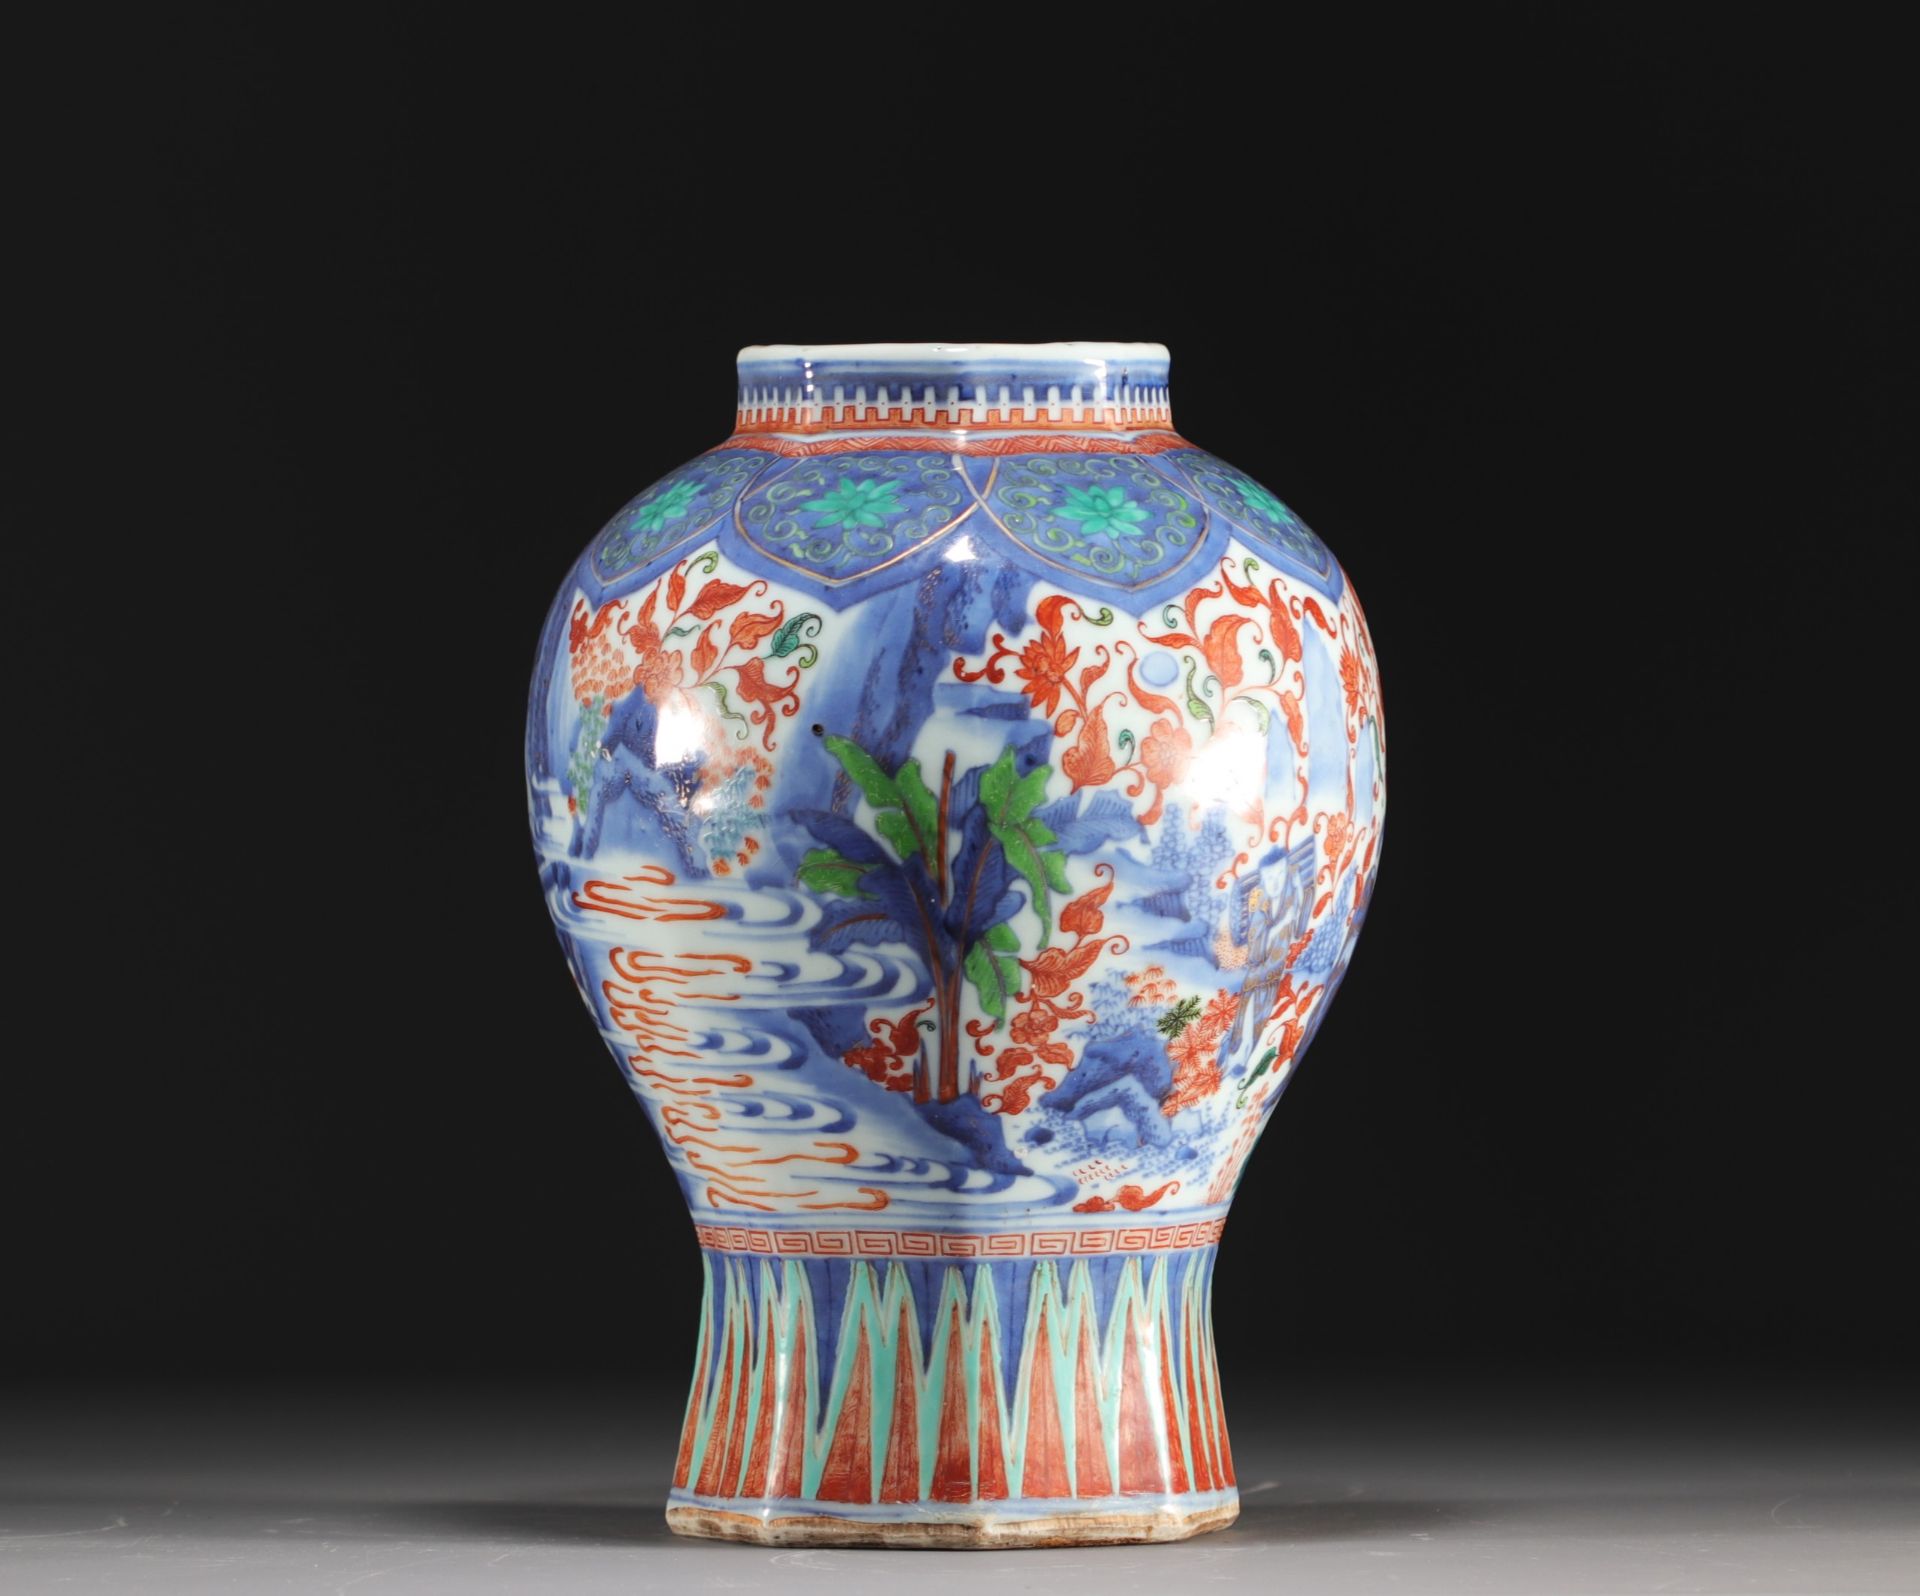 China - Polychrome porcelain vase decorated with figures and landscape, transition period. - Image 5 of 7